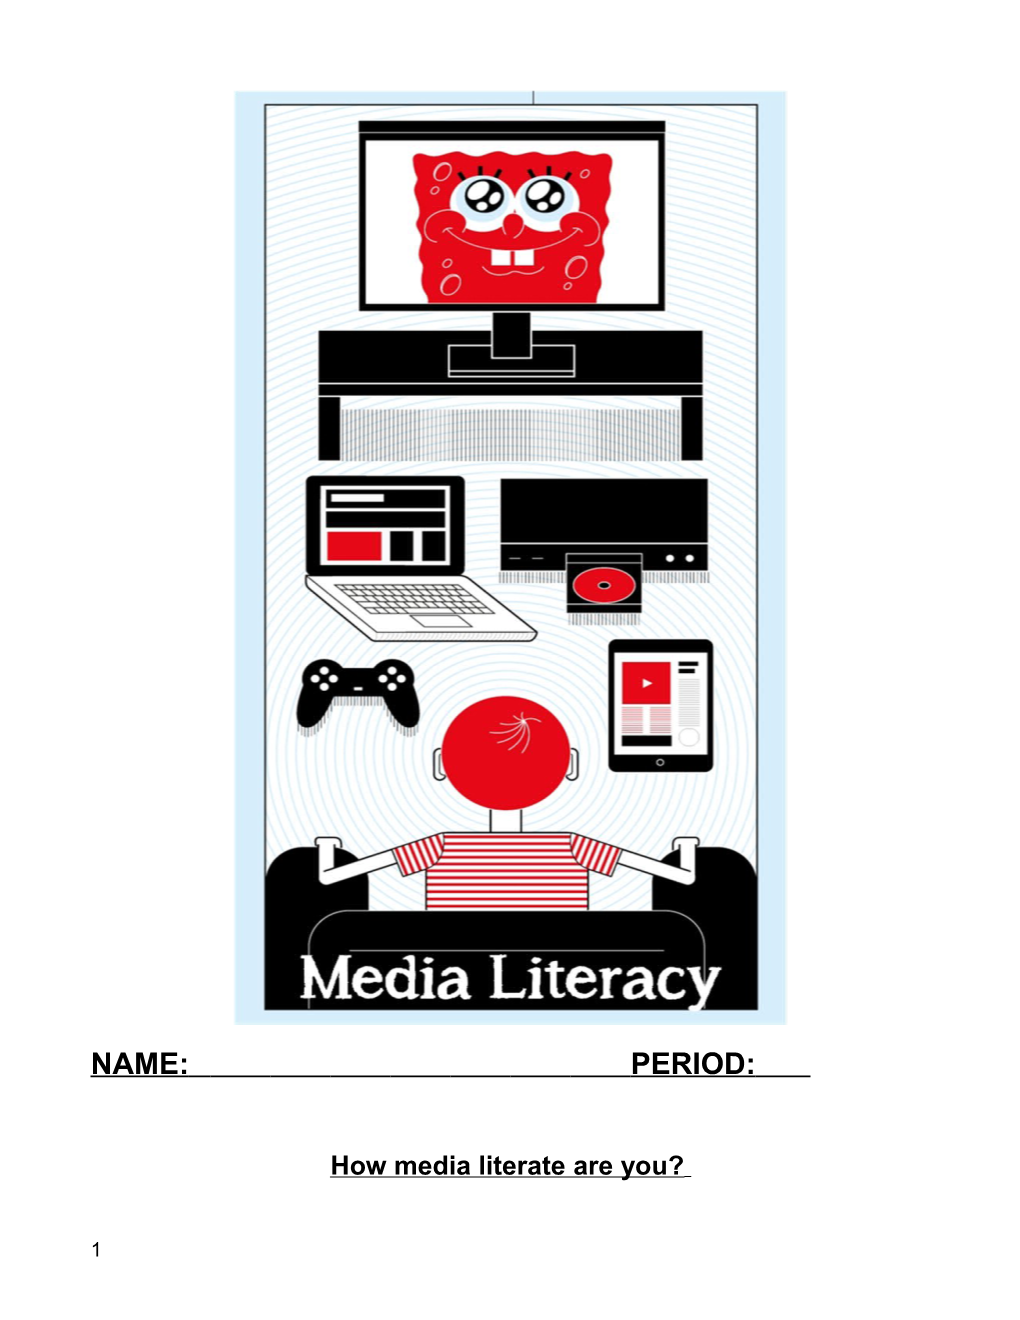 How Media Literate Are You?